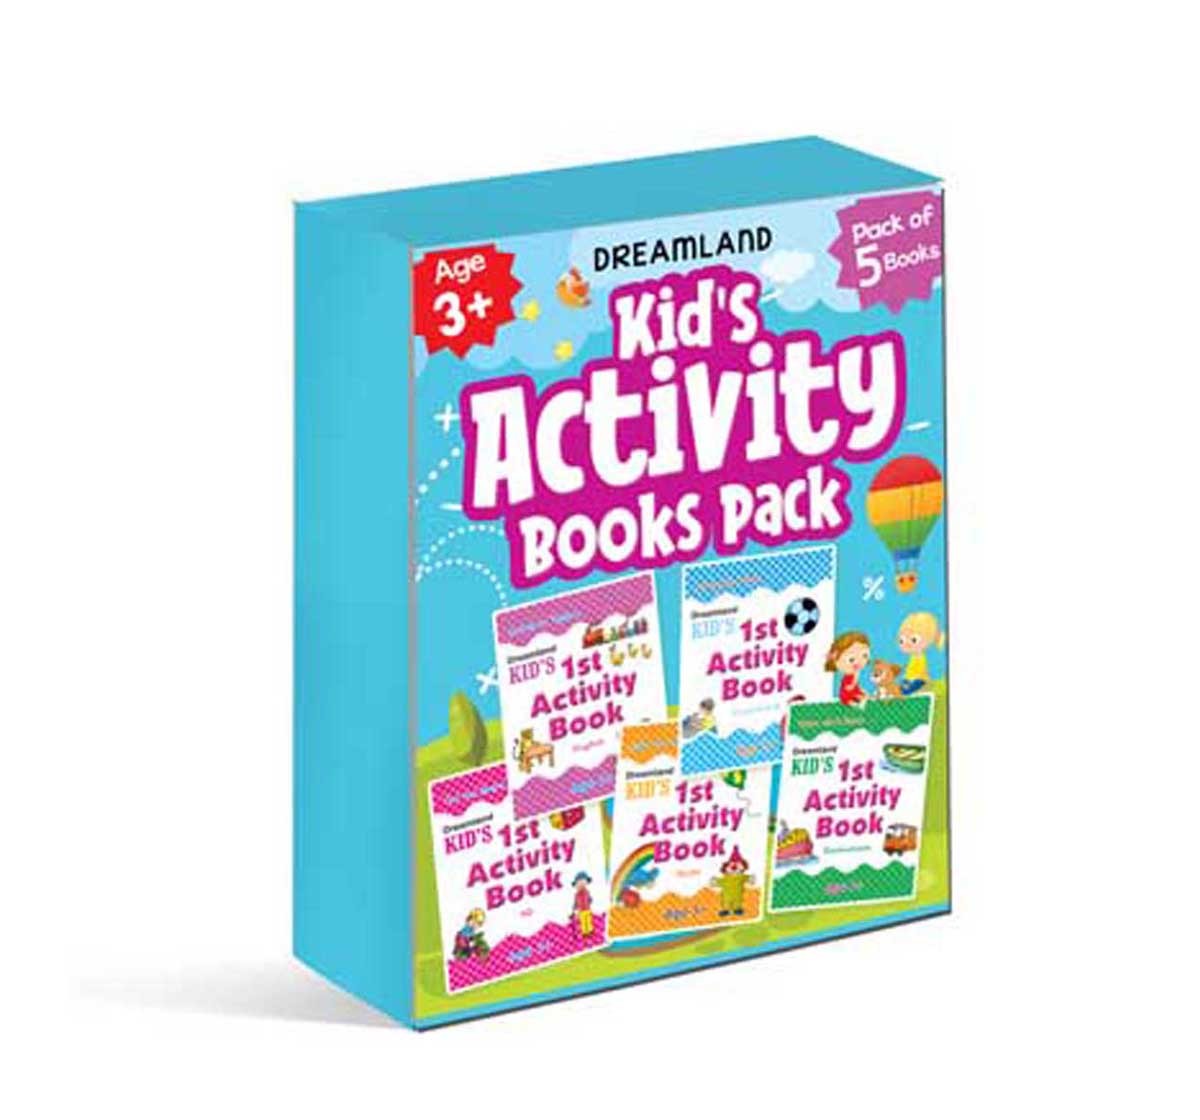 Dreamland Paperback 1st Activity Pack Books for Kids 3Y+, Multicolour